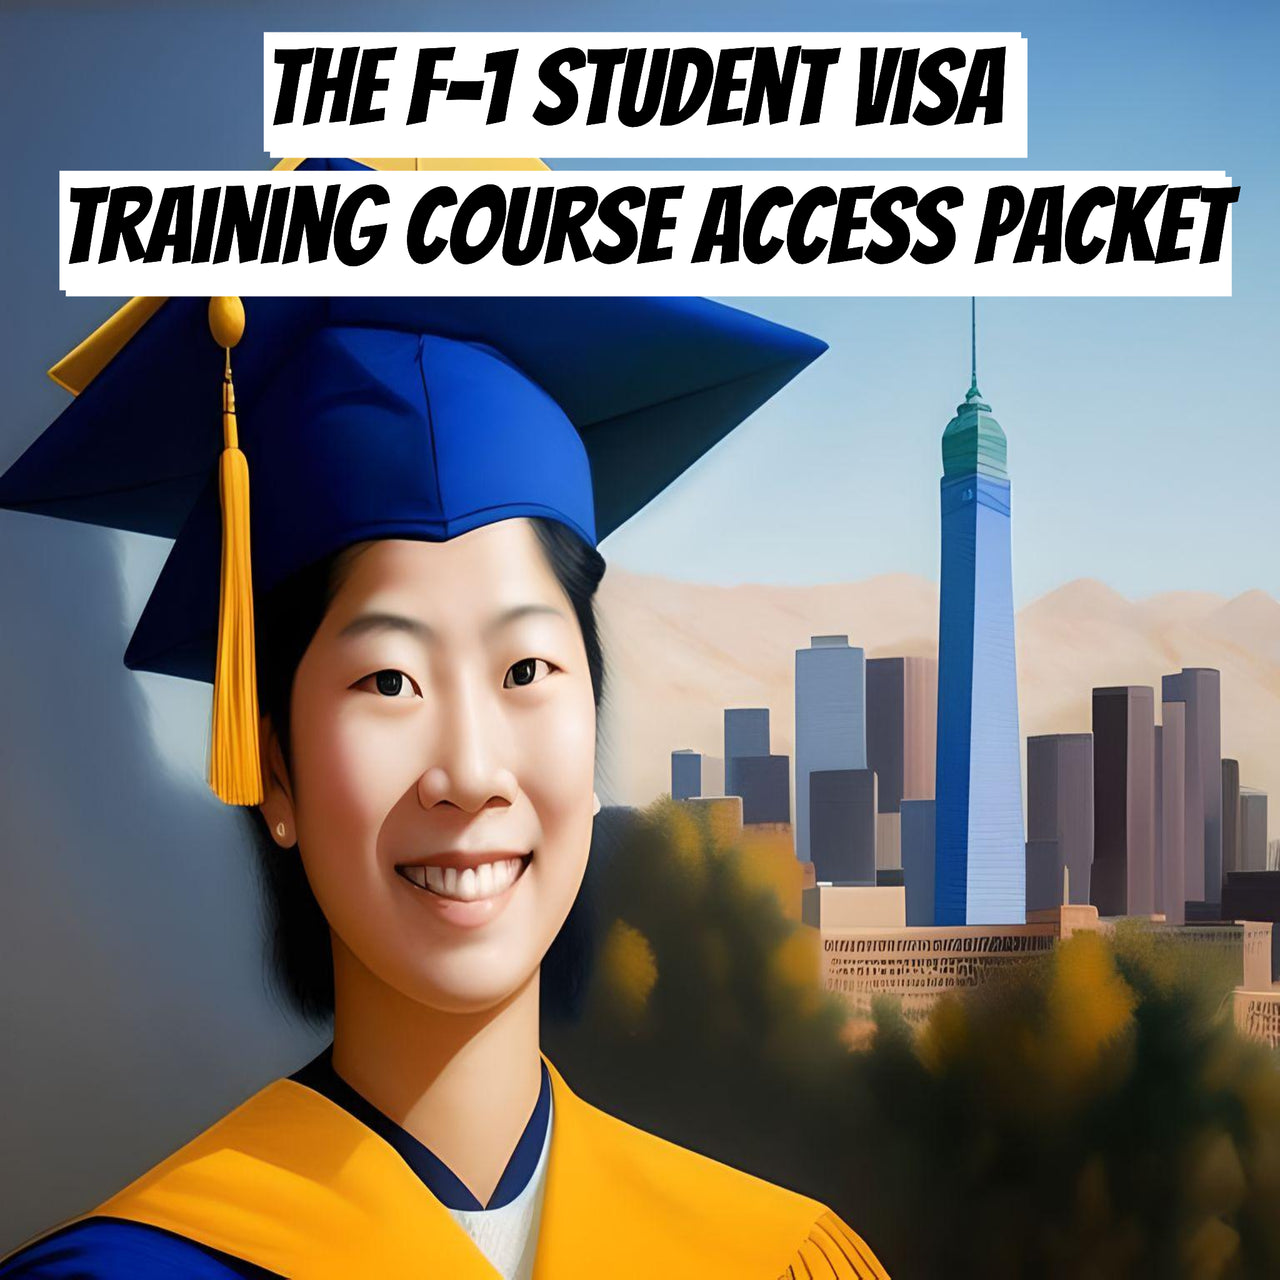 F-1 Student Visa Training Course Access Packet